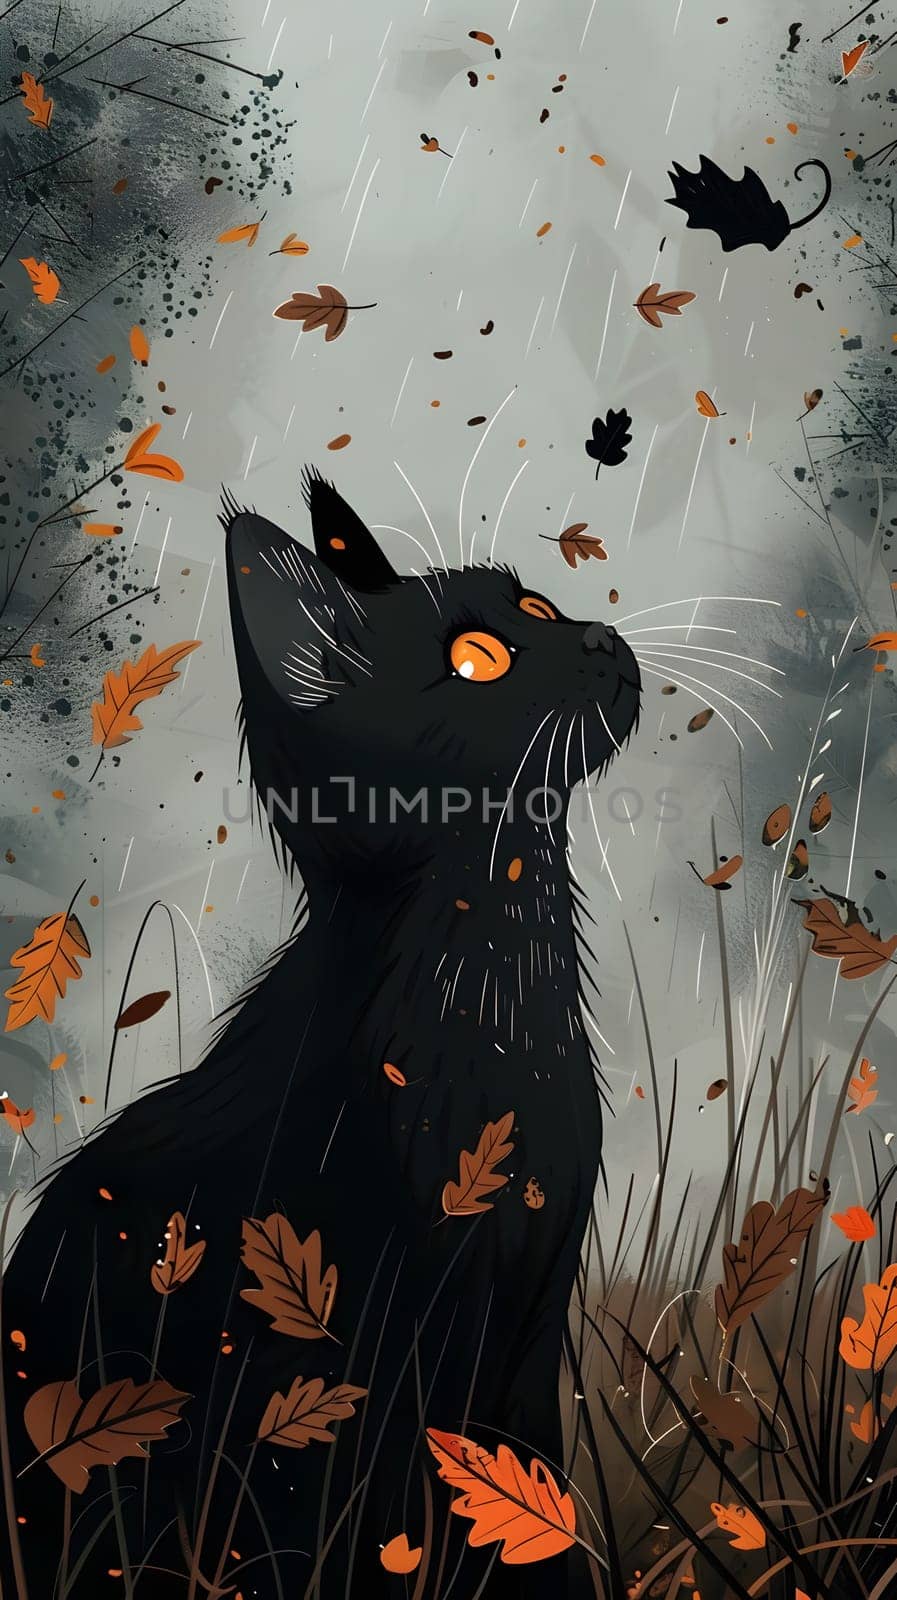 a black cat with orange eyes is sitting in the grass surrounded by leaves by Nadtochiy